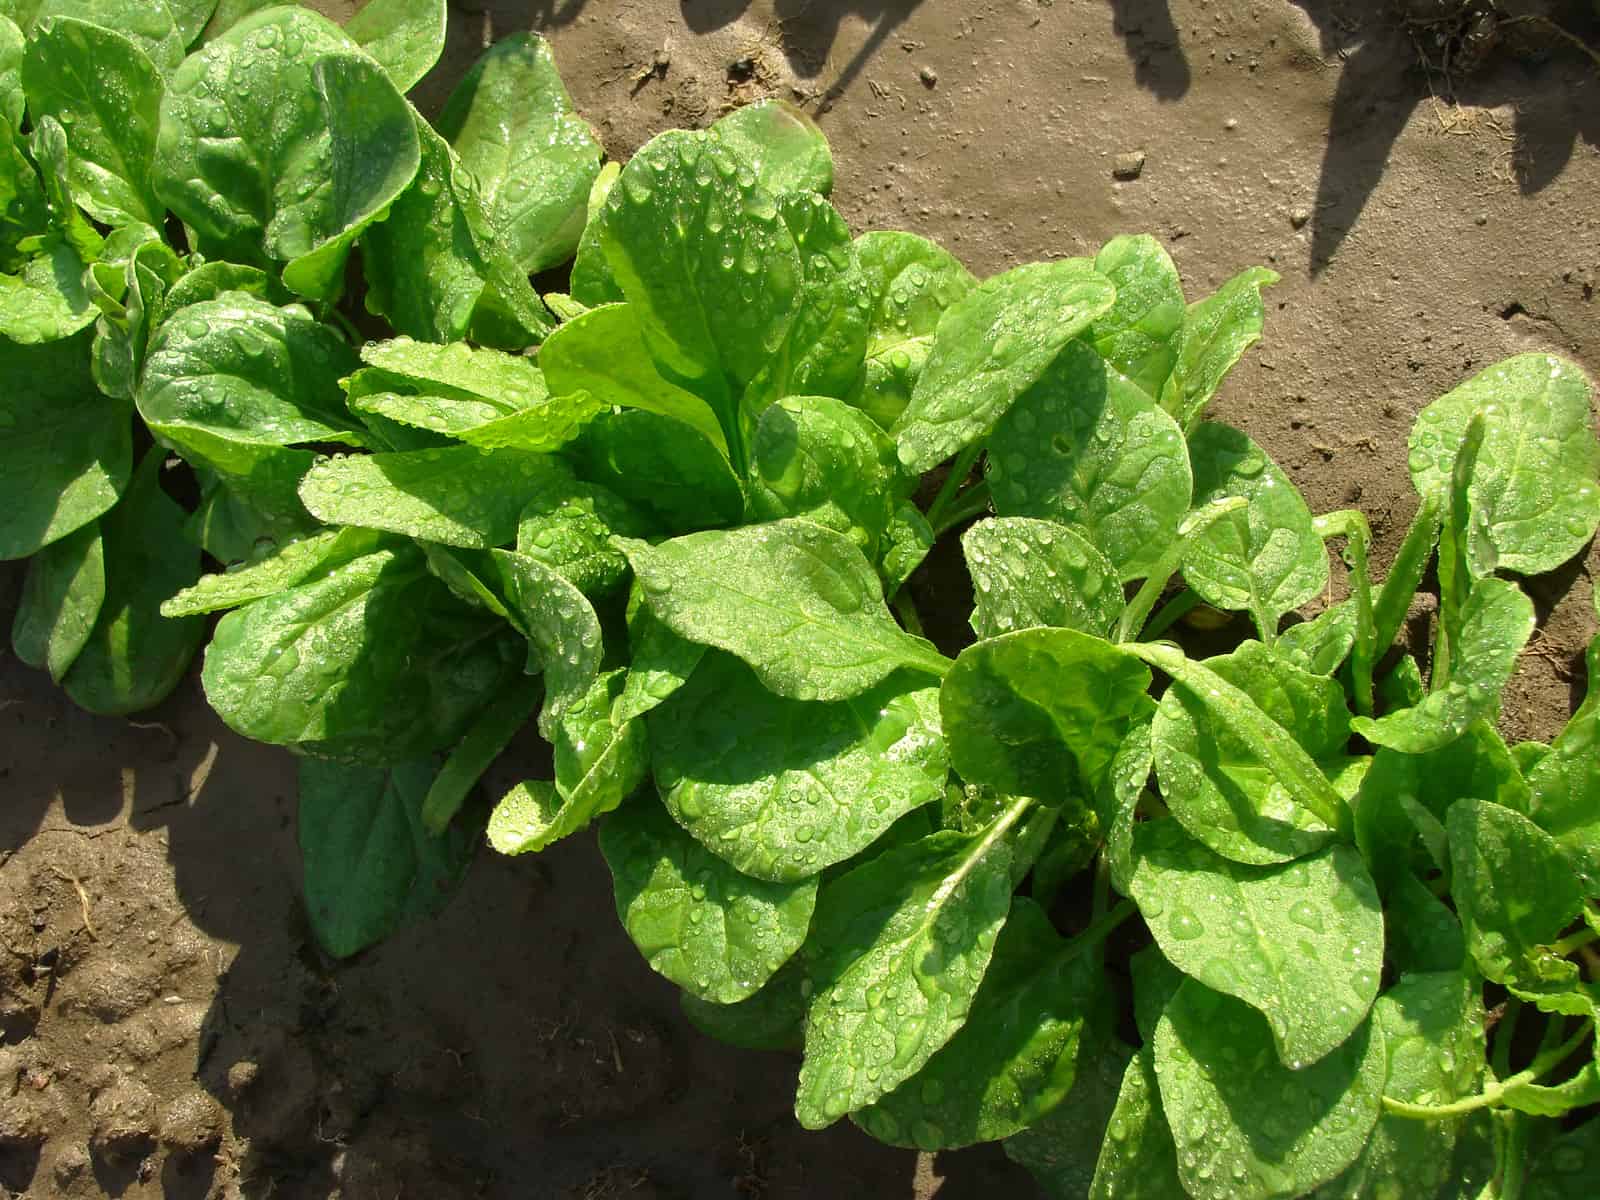 Mature spinach plants